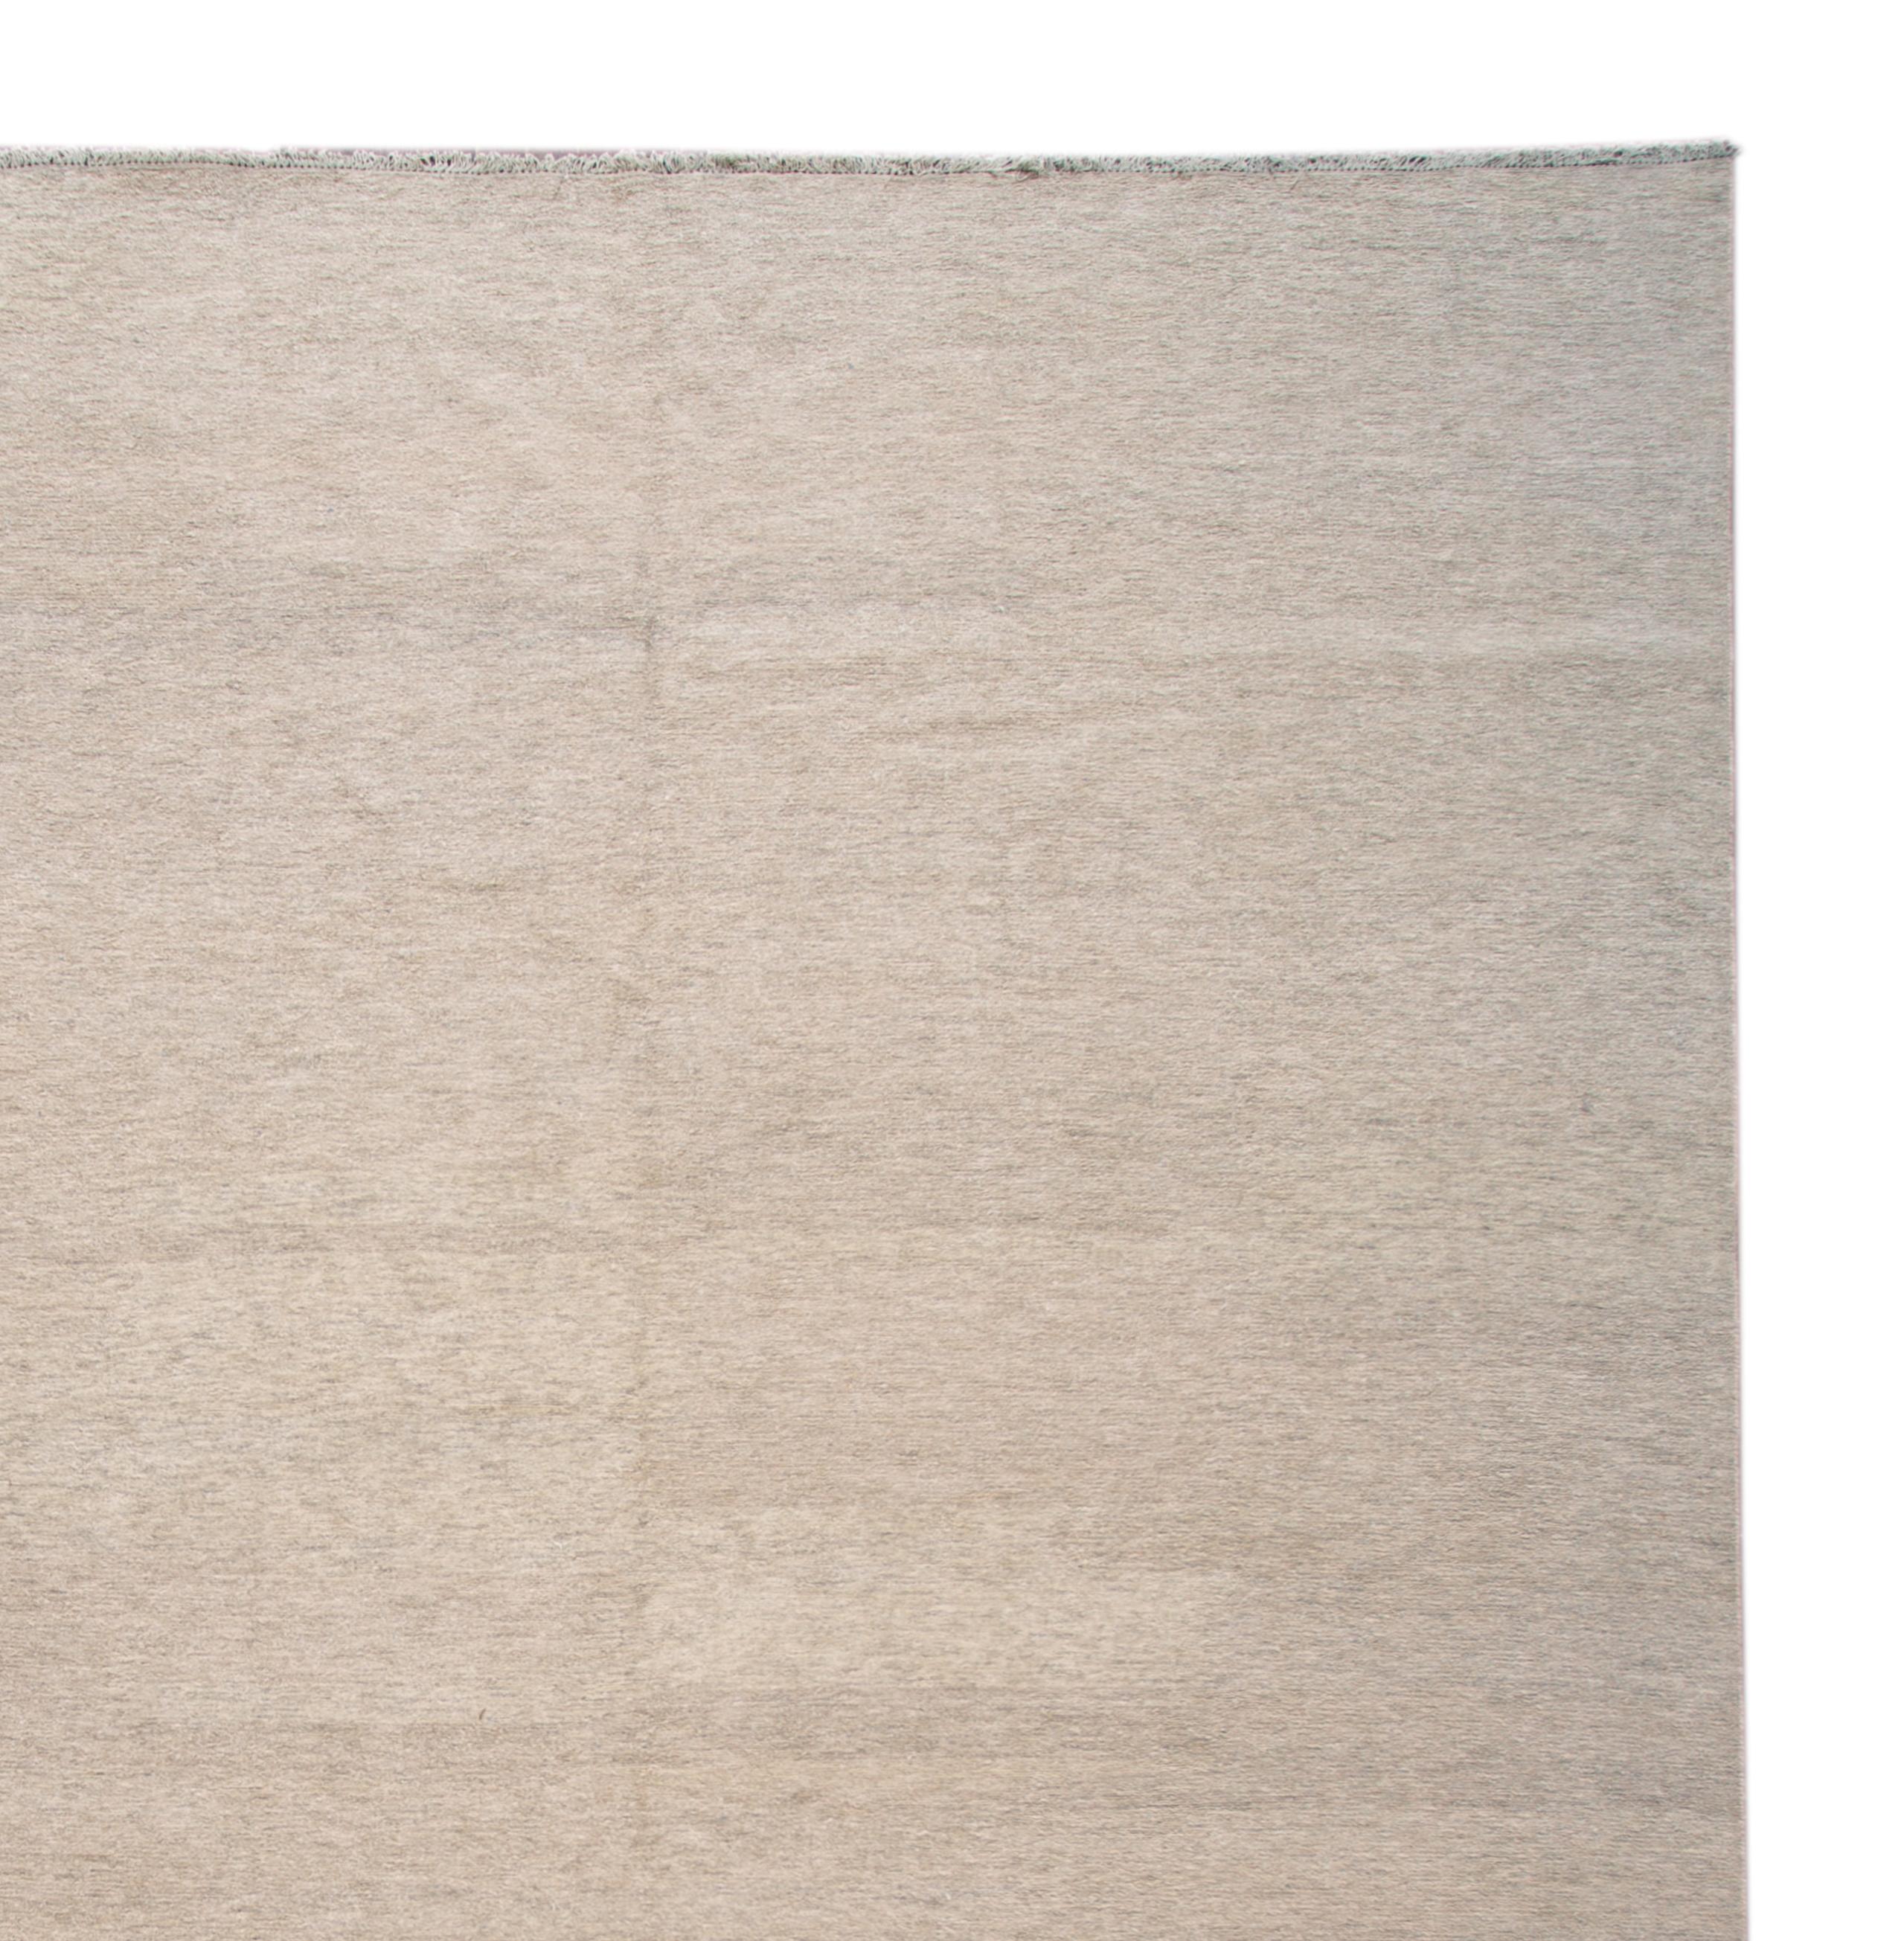 Beautiful modern Soumak rug with an ivory/beige solid color field. 

This rug measures 11' 10